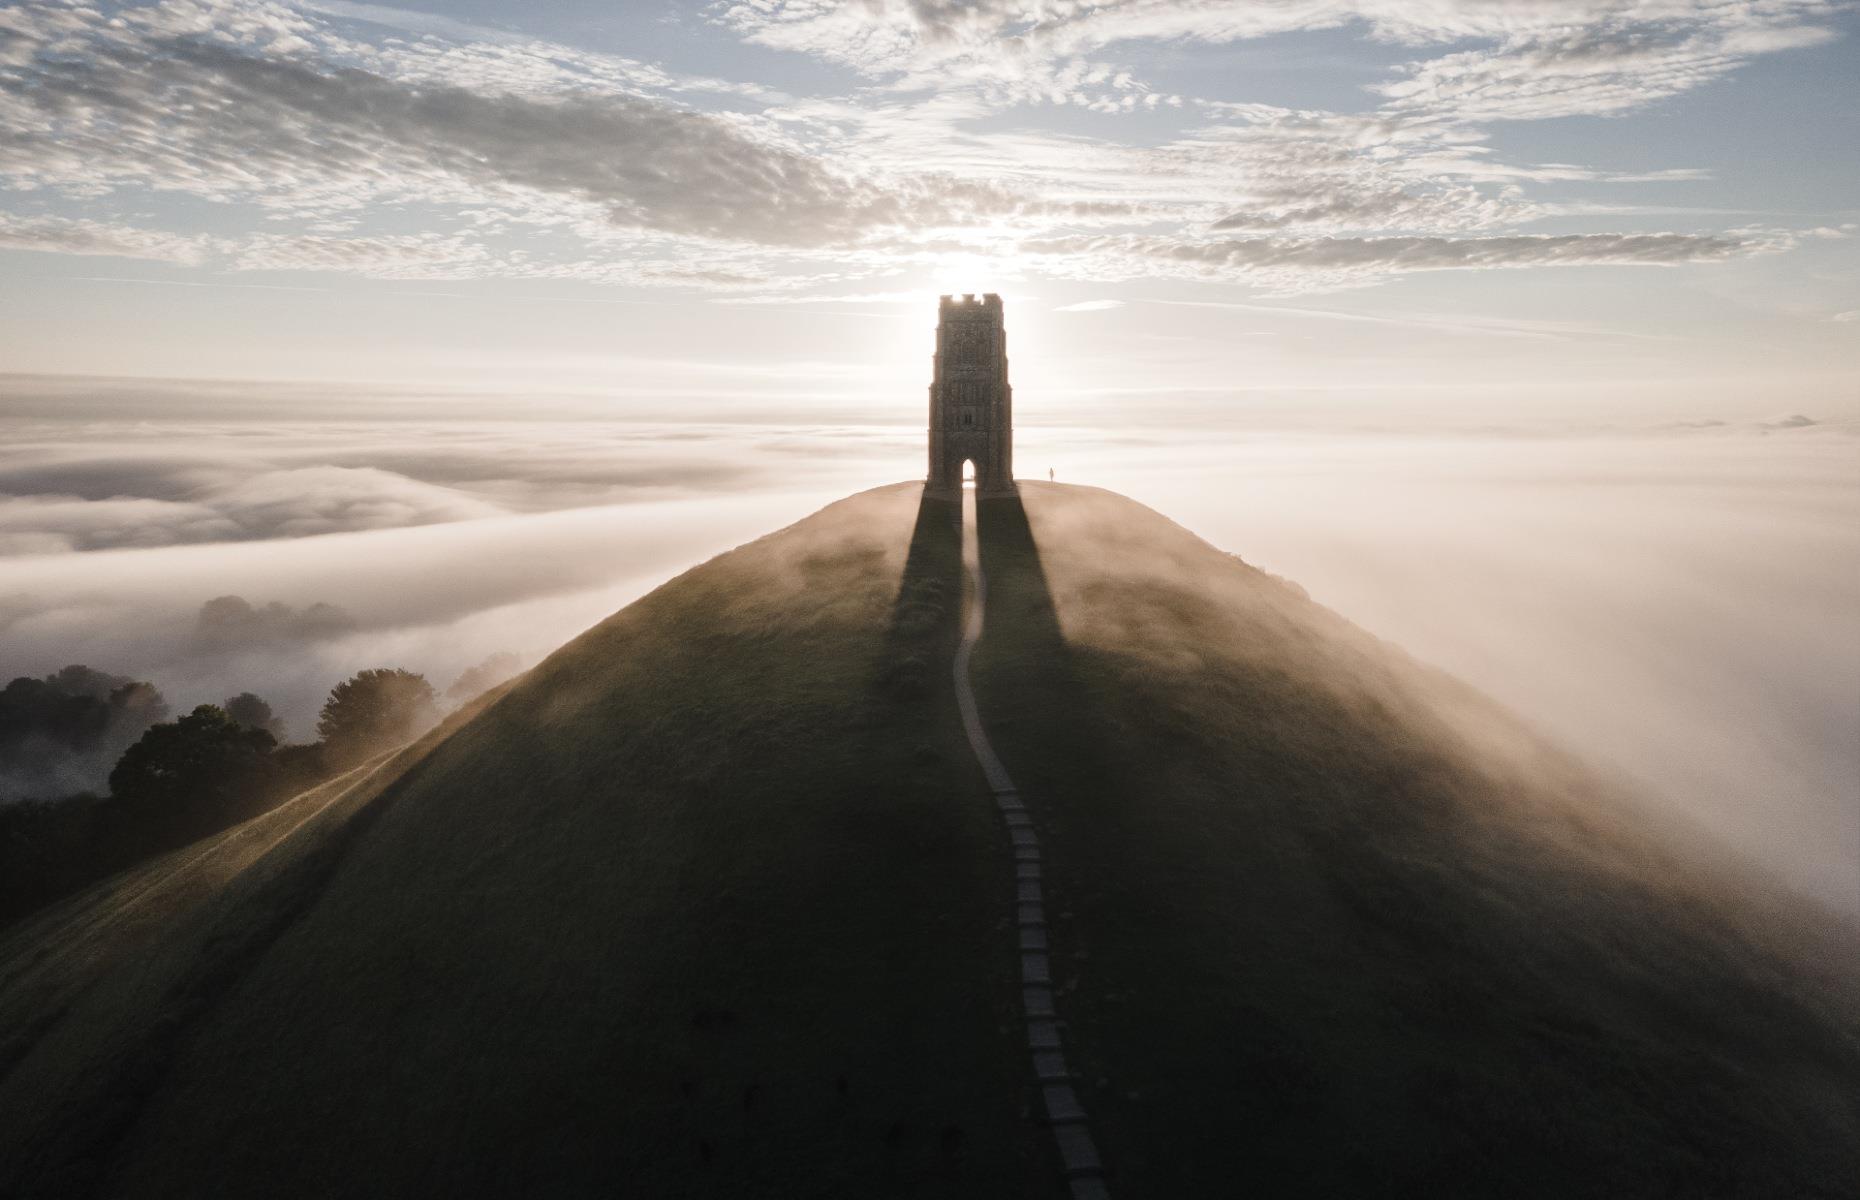 <p>Bristol-based photographer Sam Binding took home the top prize in the Historic England category for this captivating image of Glastonbury Tor. Binding said, "the low-lying levels are prone to mist, and so with a good forecast I headed out very early that morning. When I arrived, I was in for a very nice surprise. As the sun rose up, a wave of mist swept up and over the top of the Tor, creating an incredibly ethereal scene."</p>